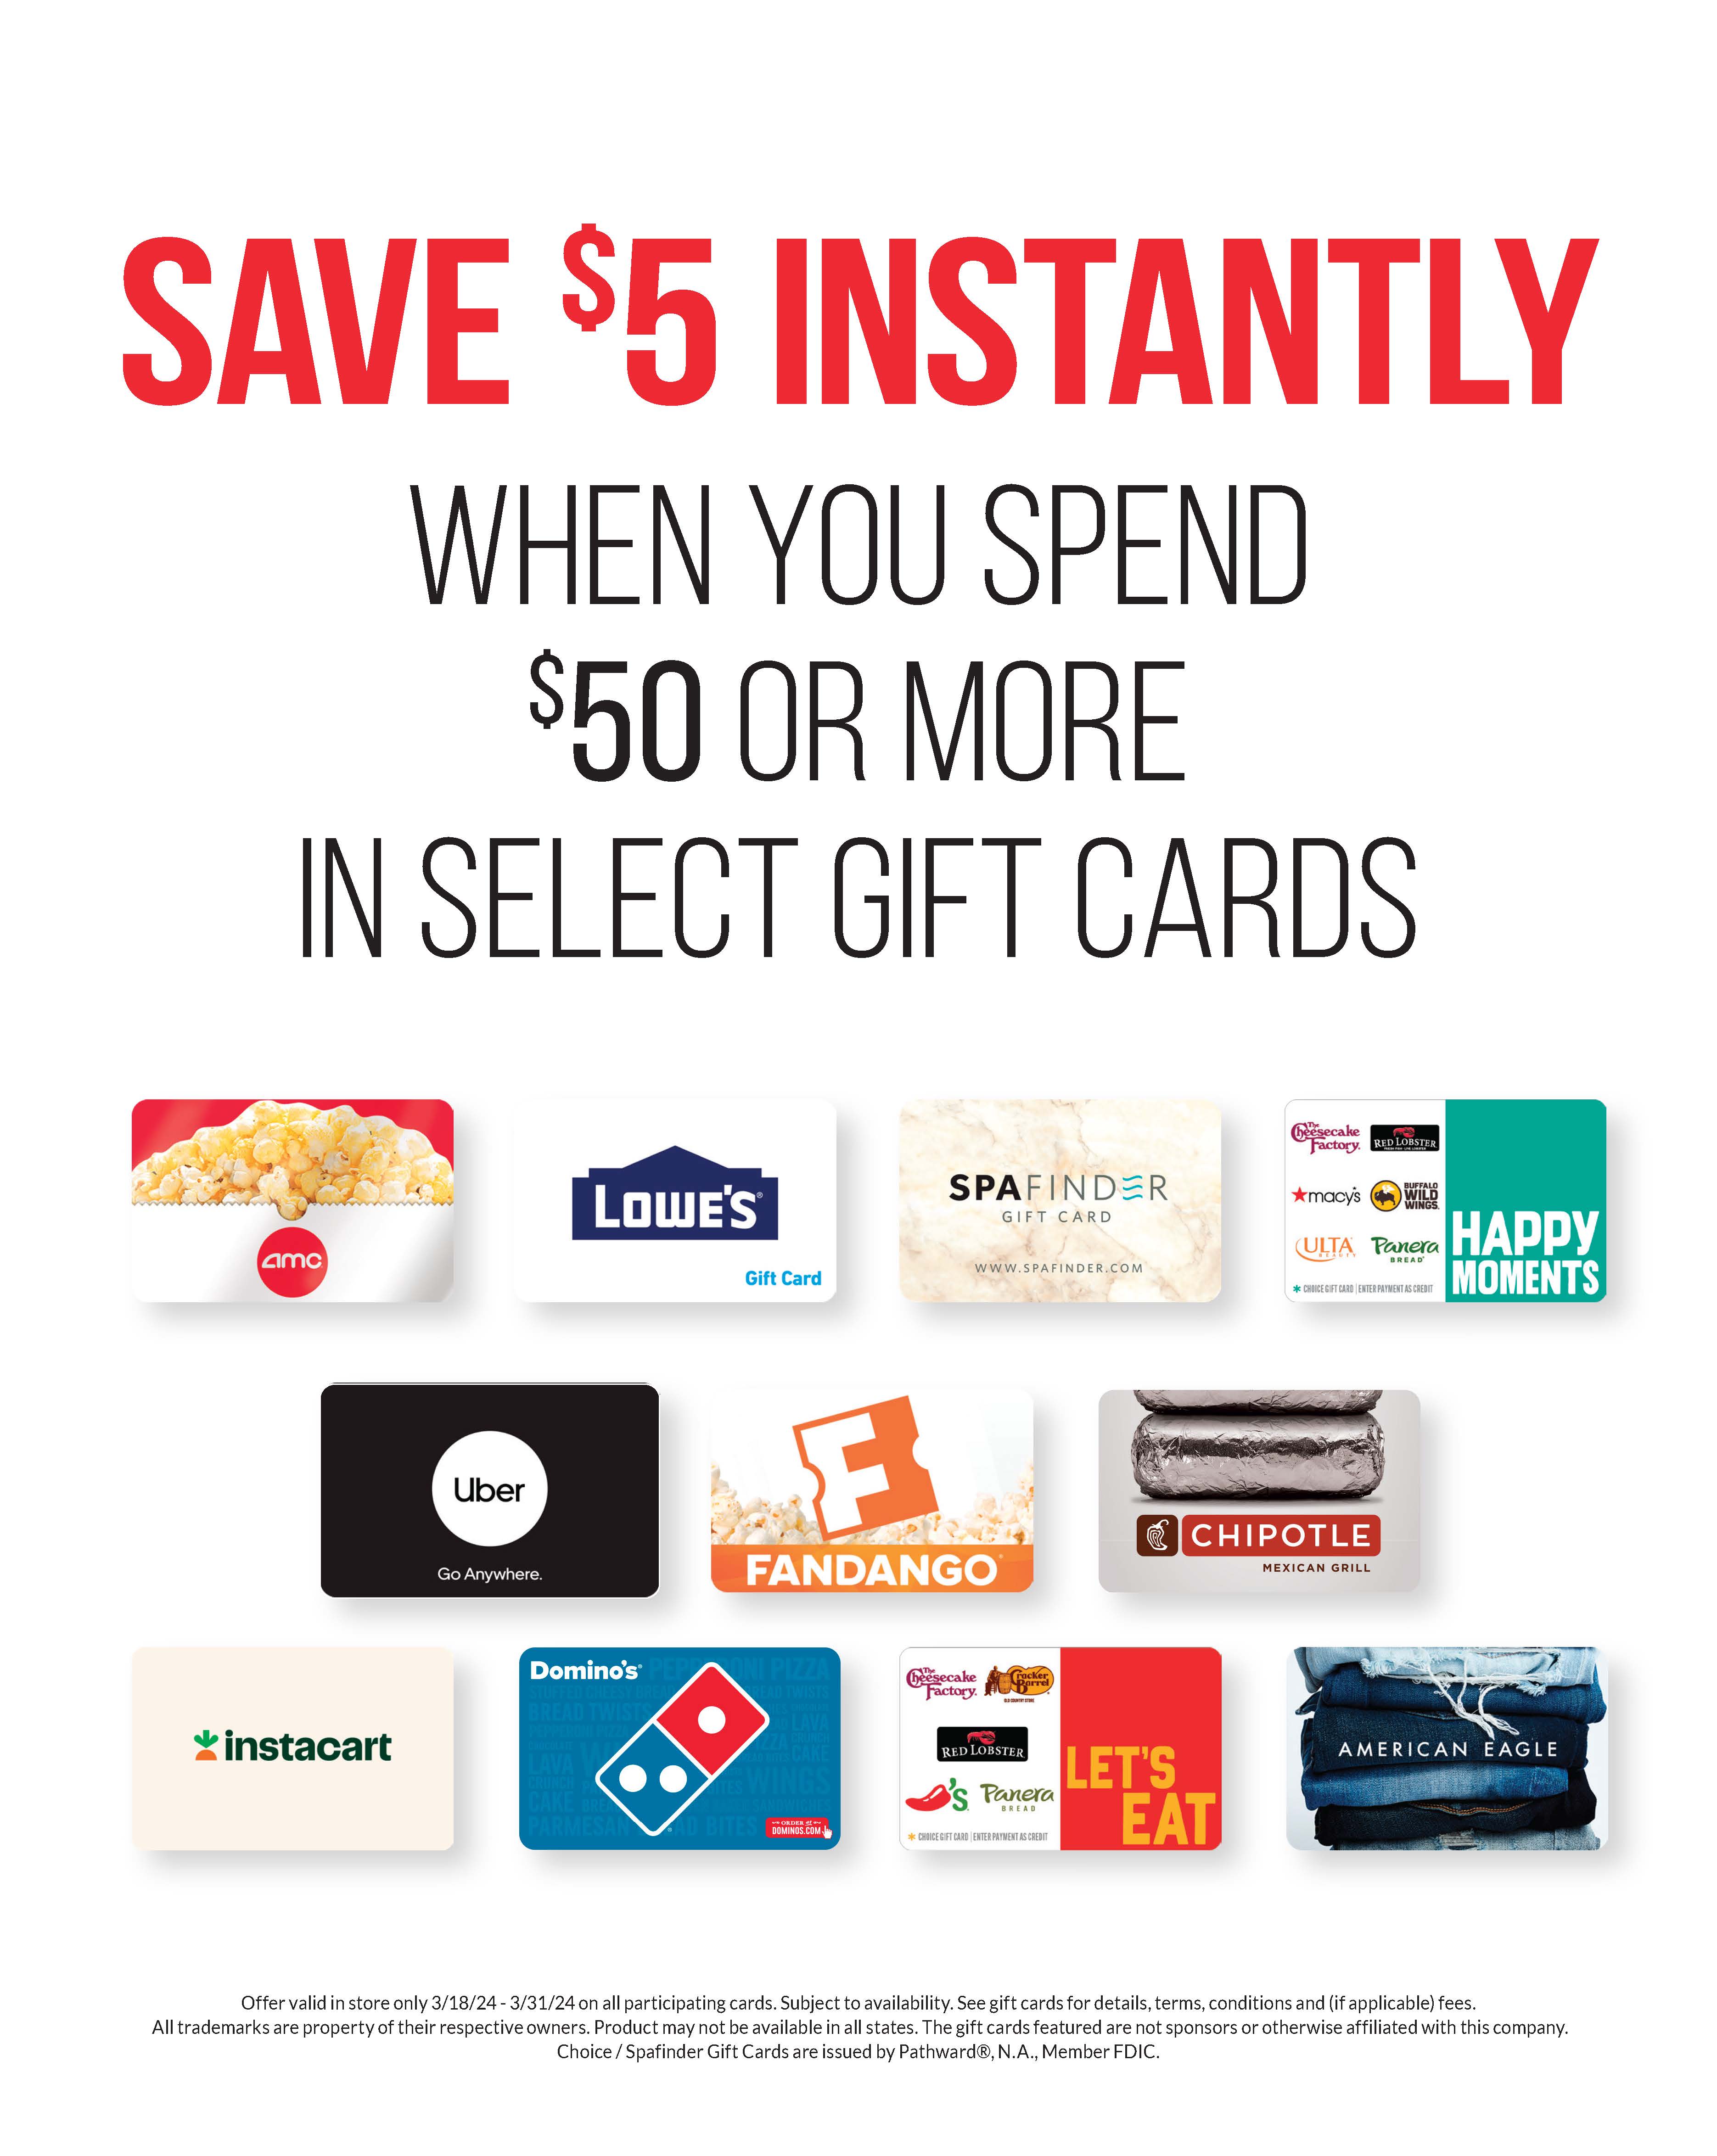 black friday gift cards